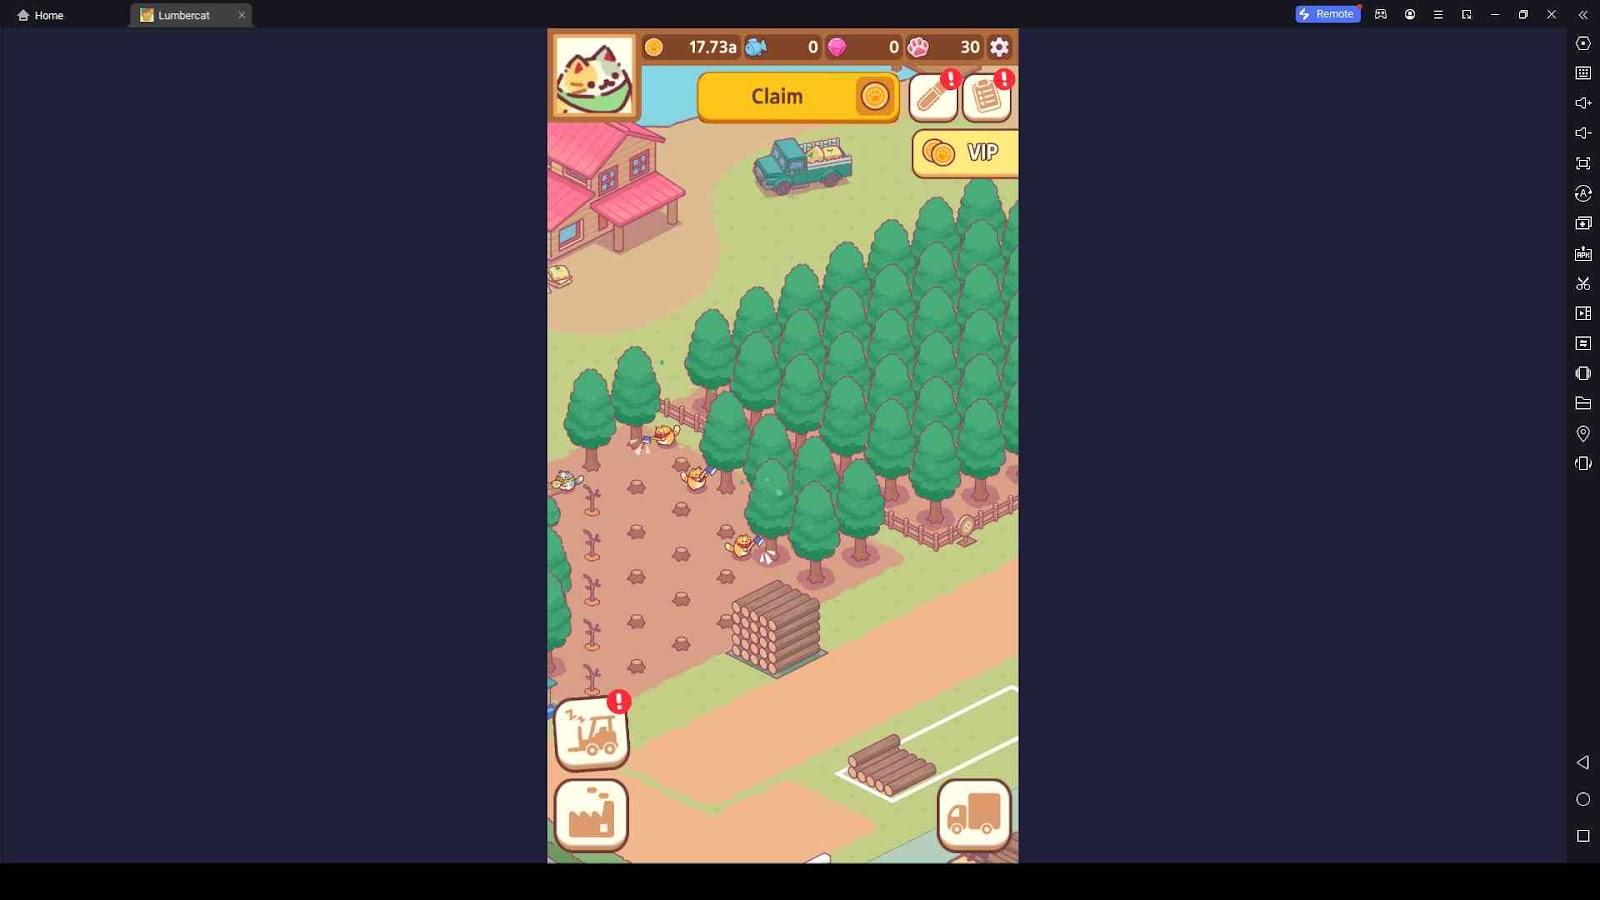 Build Up Your Timber Empire in Lumbercat: Idle Tycoon